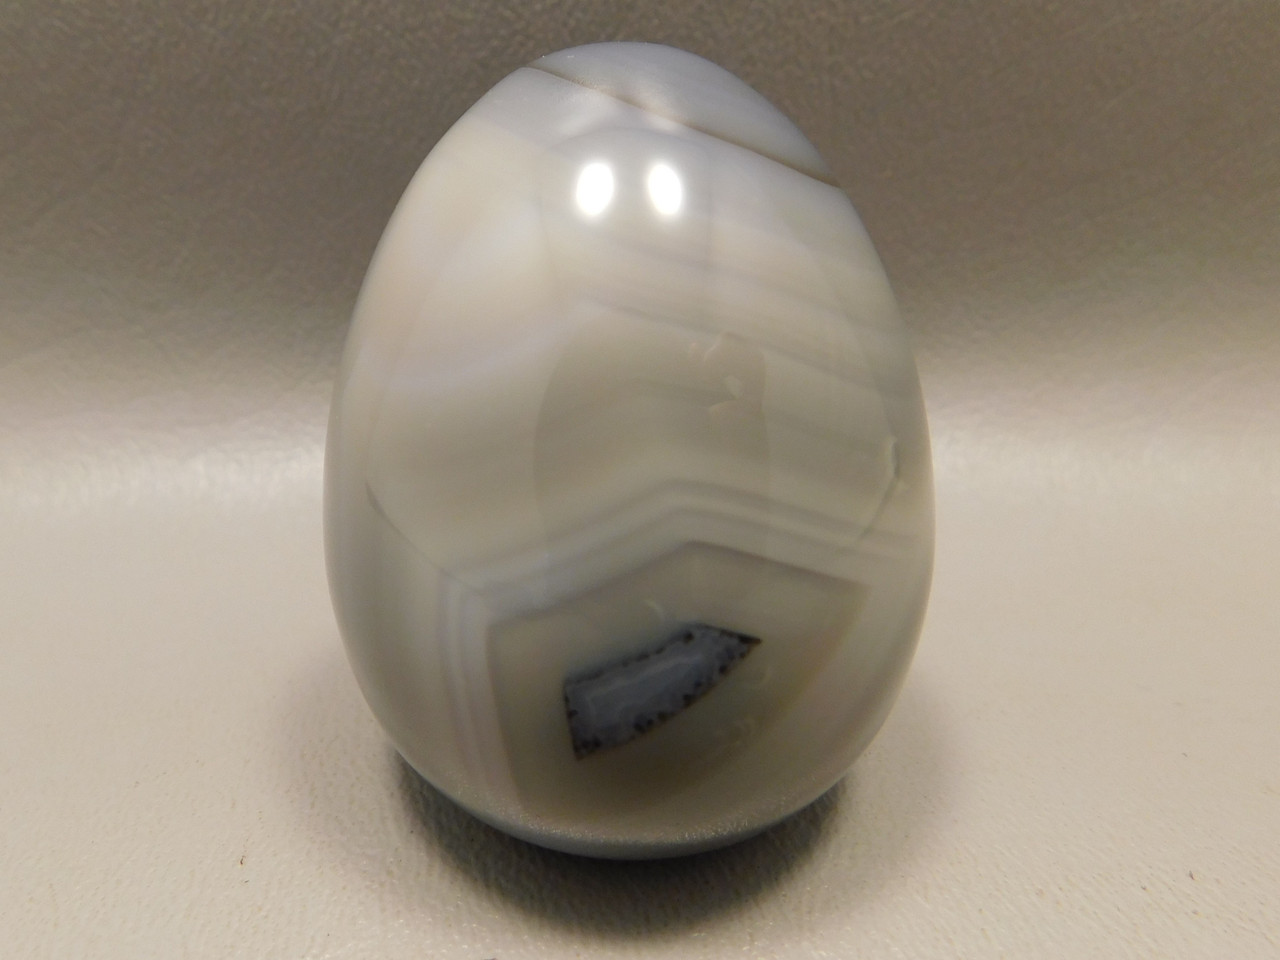 Agate Egg Shaped Stone Carving 2 inch Gray Rock Gemstone #O3